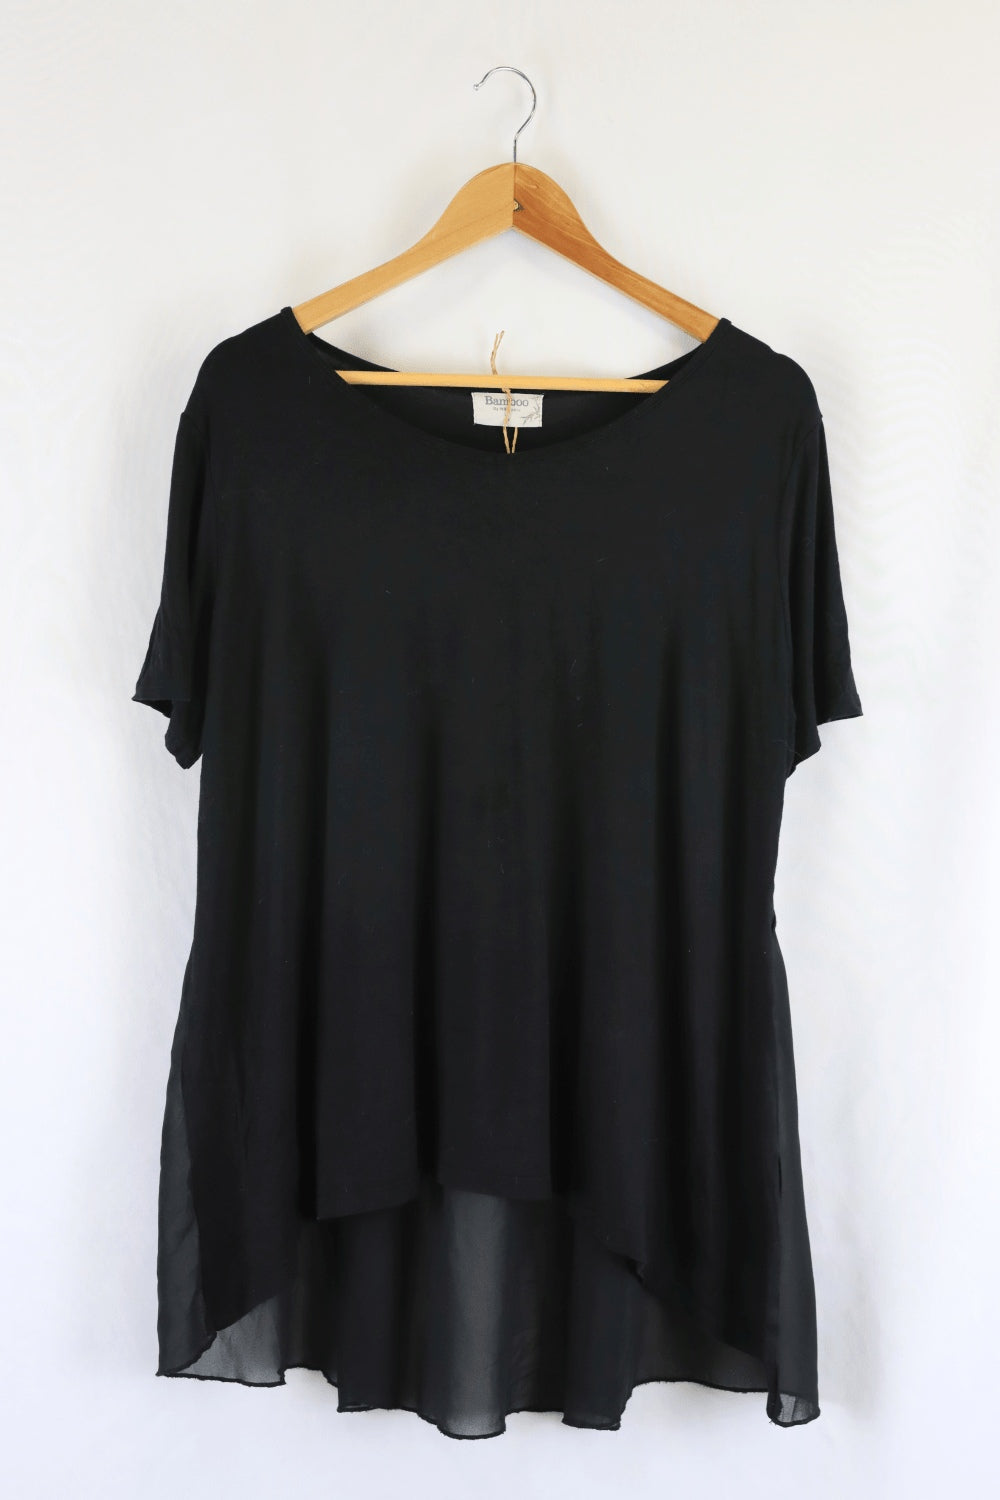 Bamboo By Whispers Black Top L